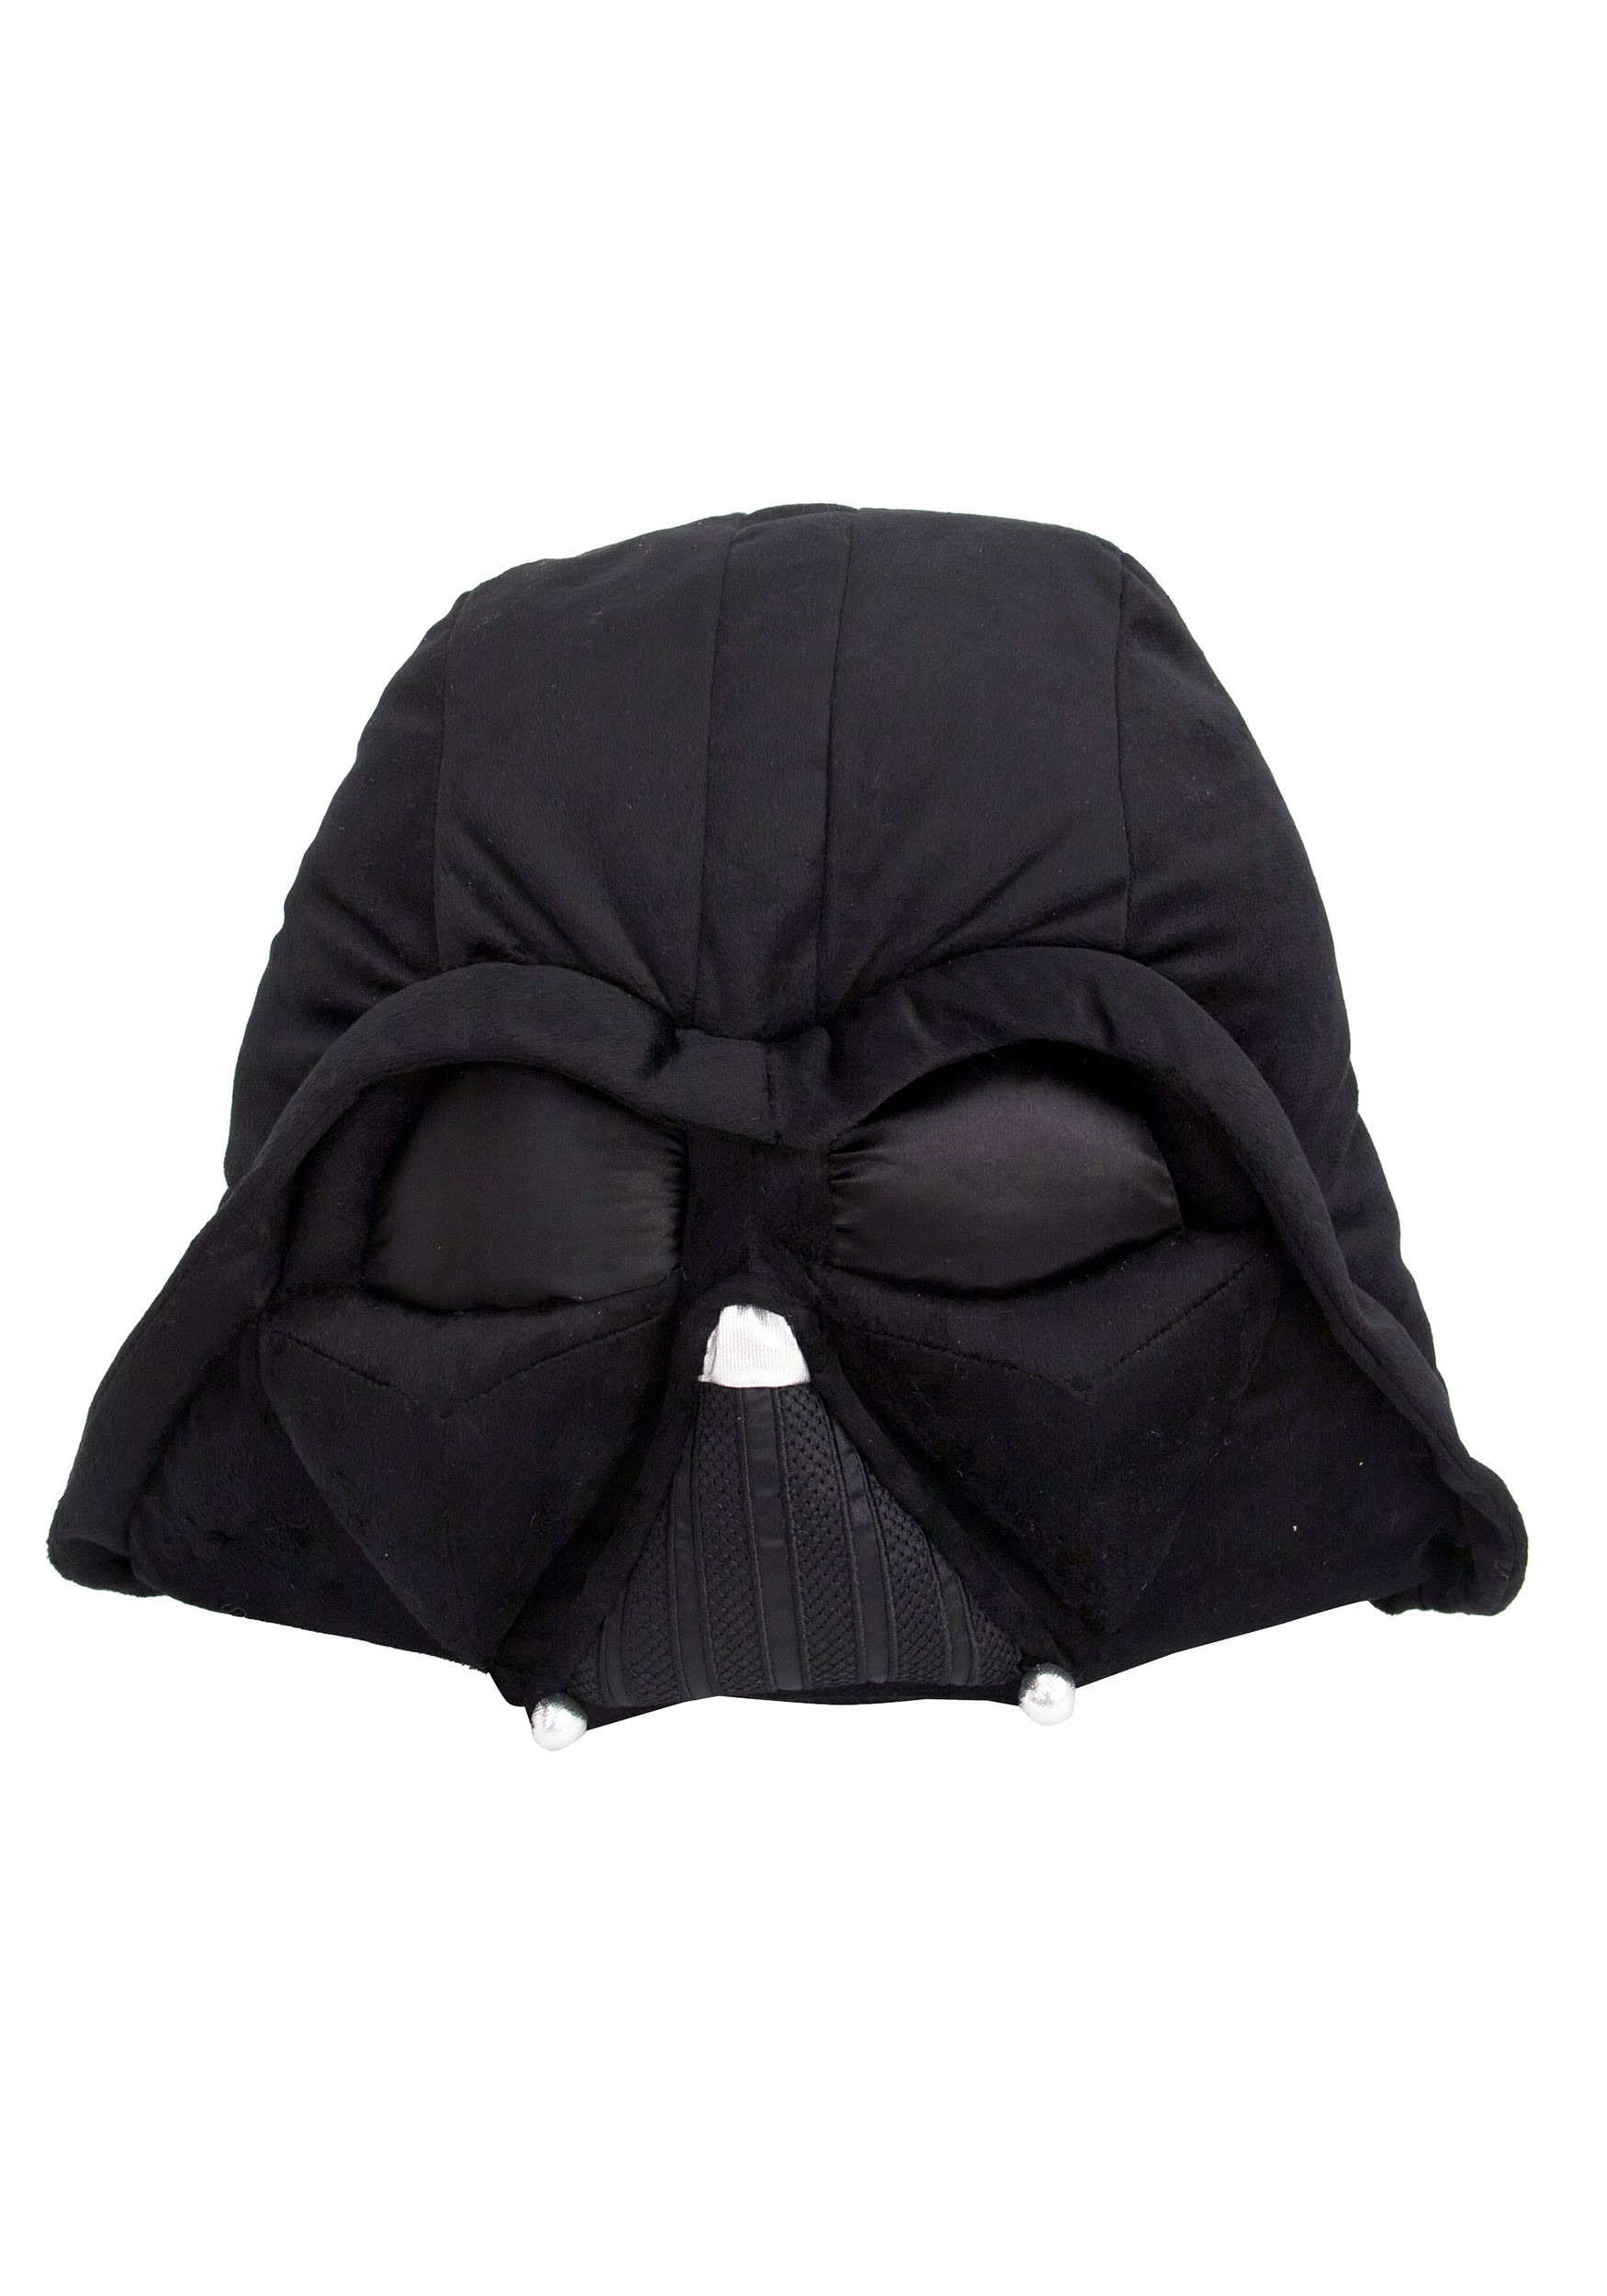 Classic Vader Star Wars Face Pillow